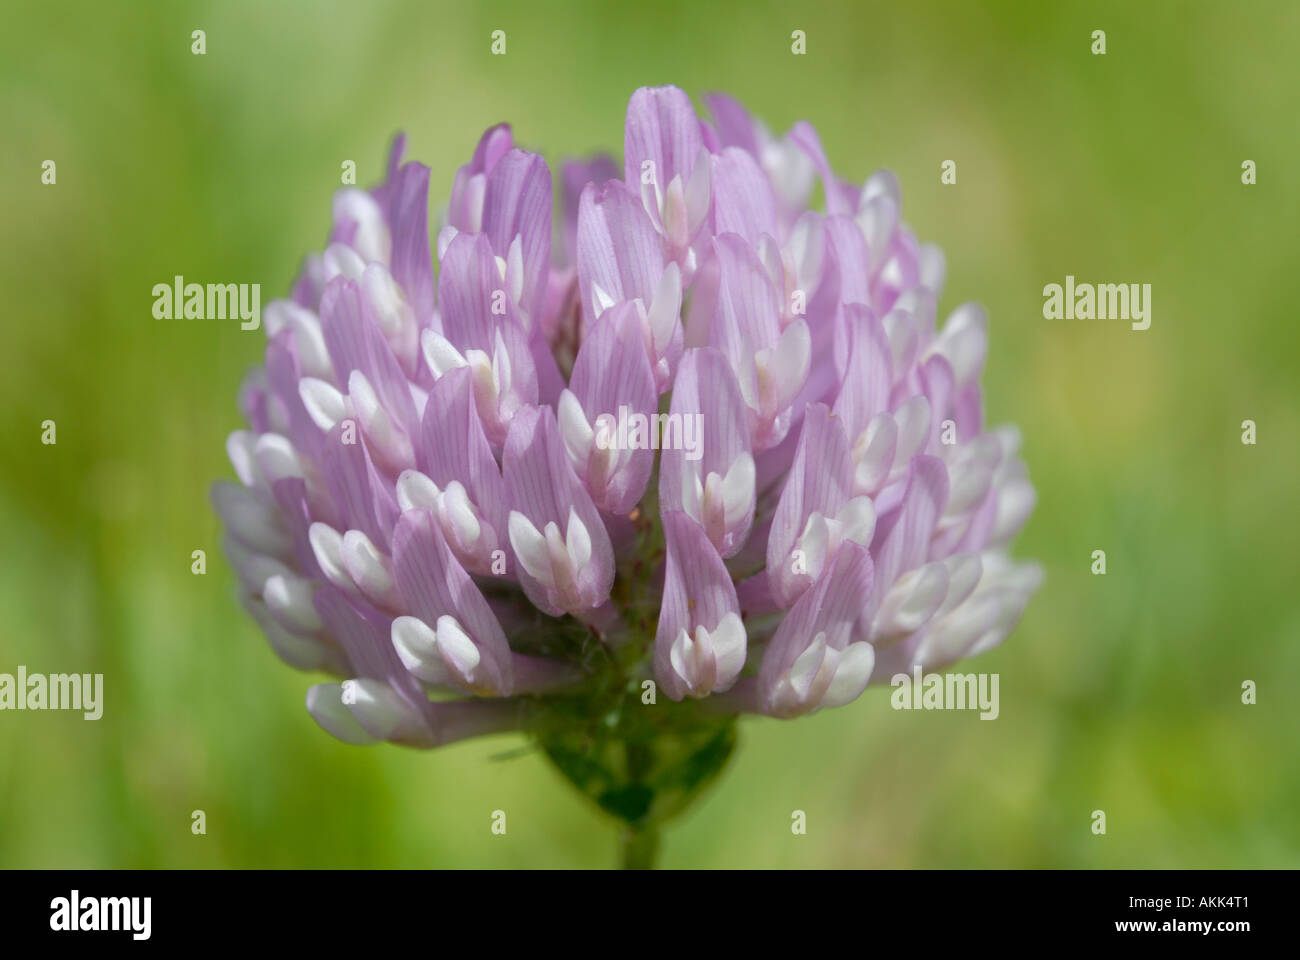 A flower head of red clover Trifolium pratense showing the pink purple flowers This is growing in a traditionally maintained ha Stock Photo